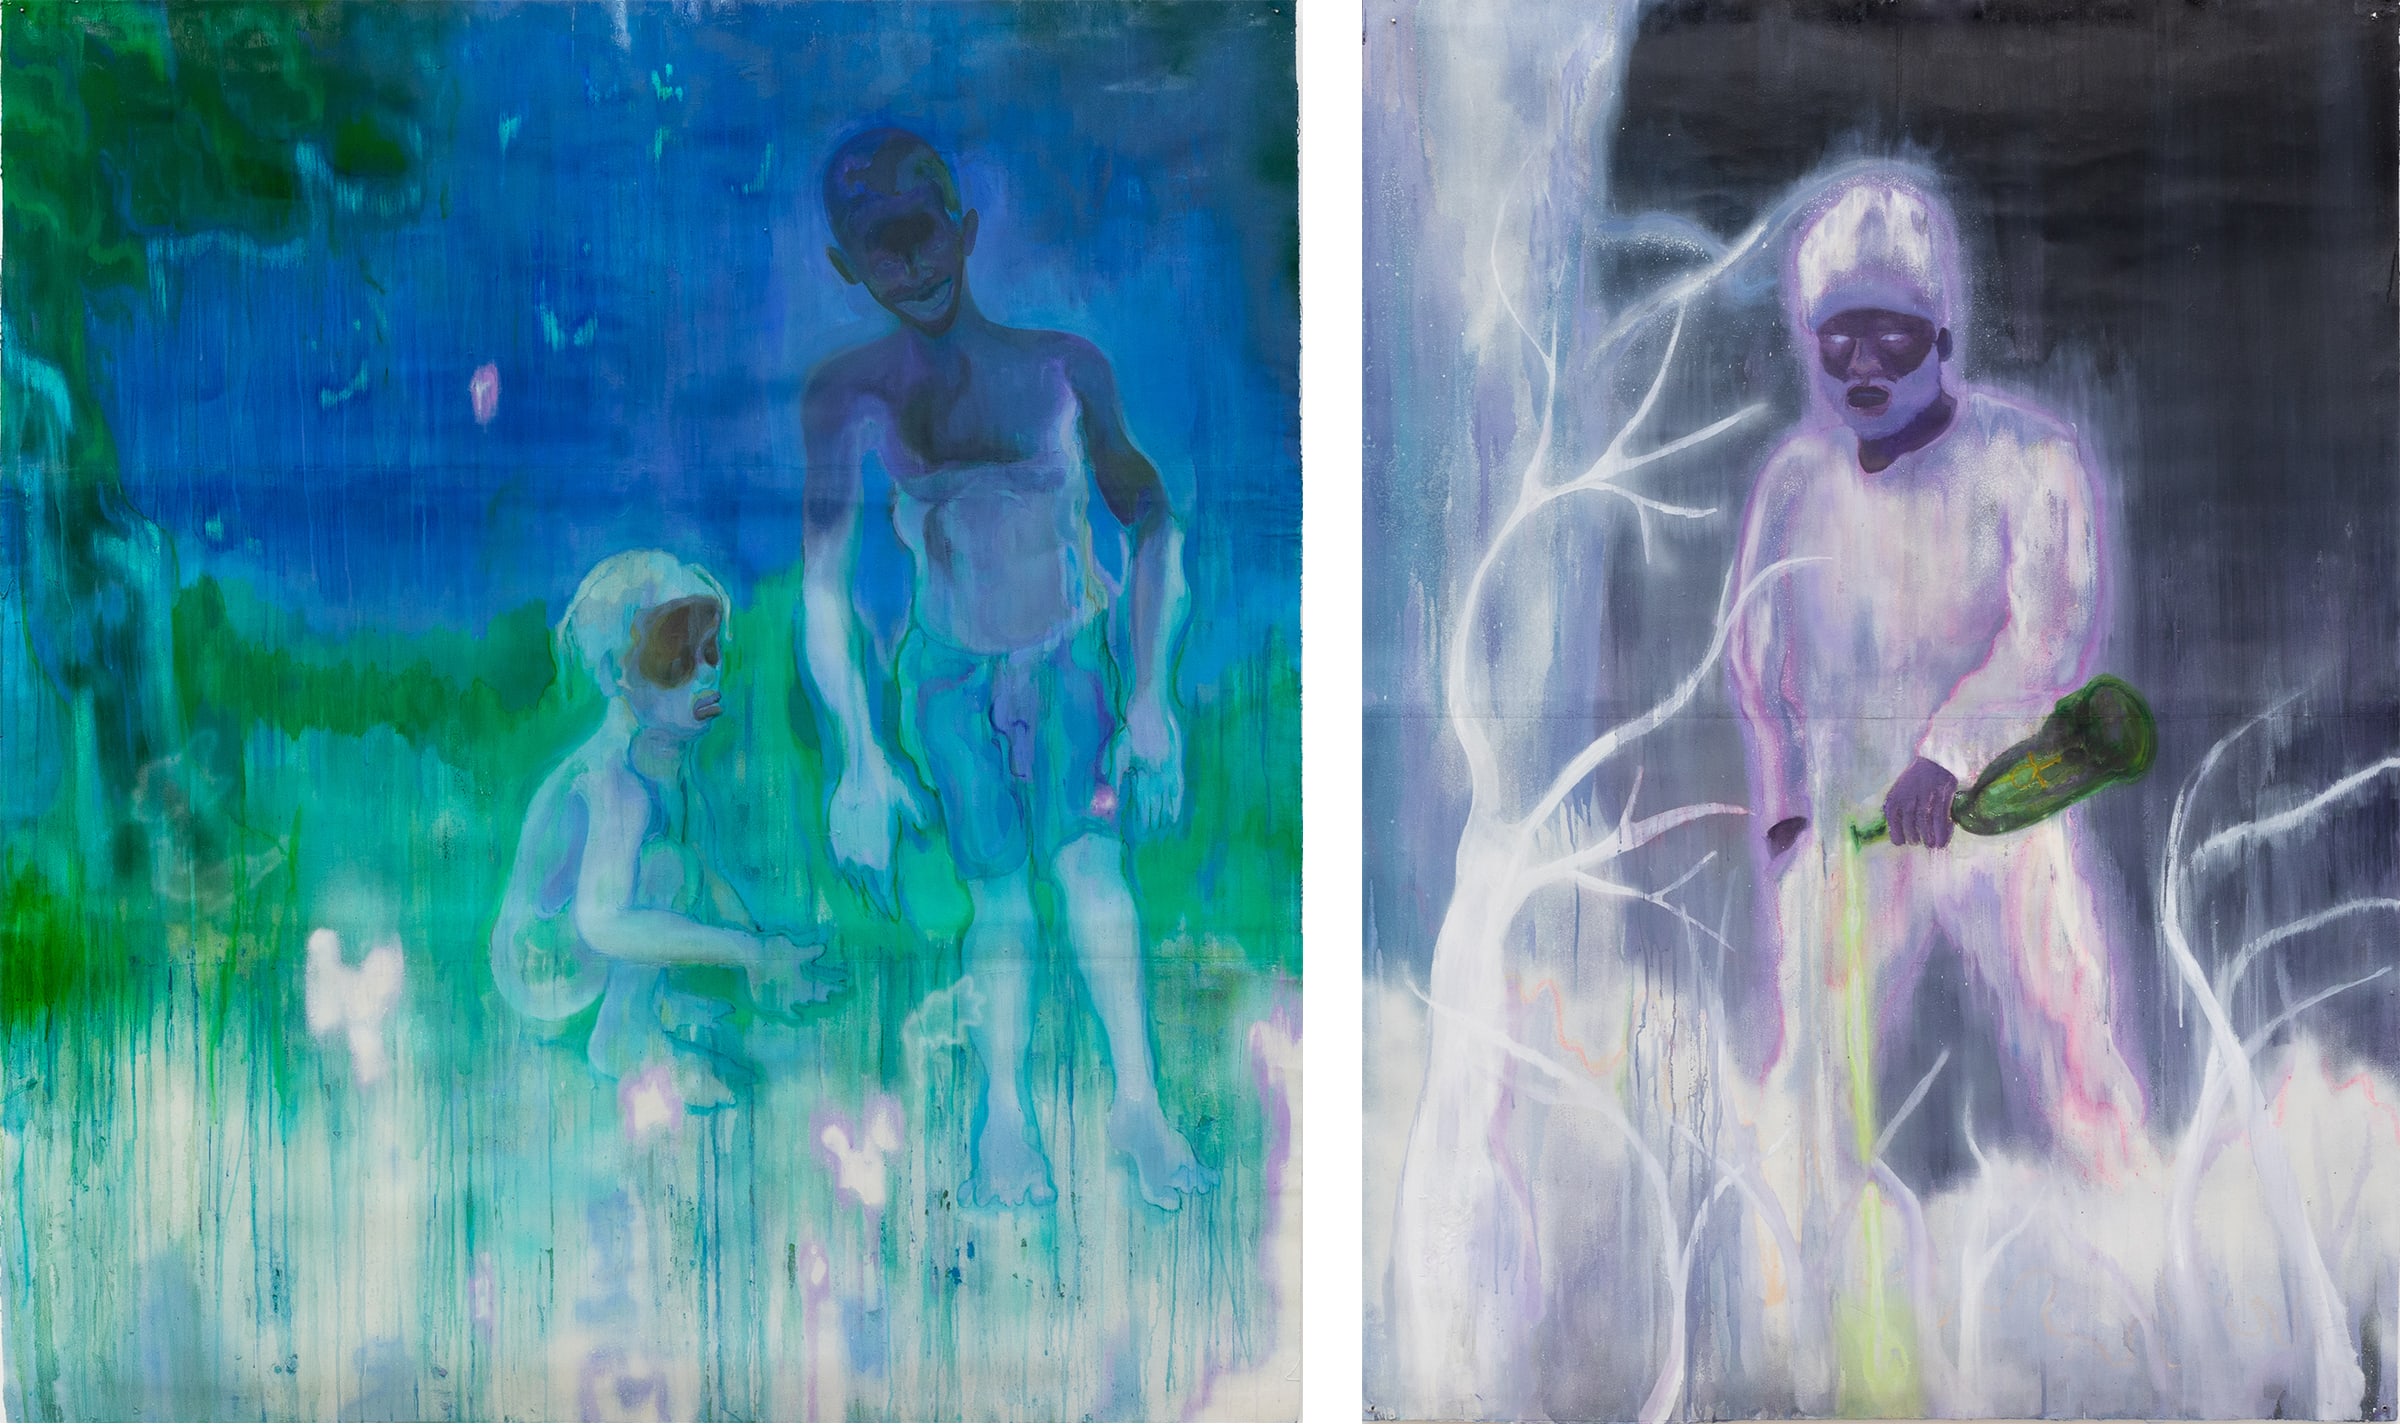 Works by Sedrick Chisom. Left: The Nighttime Encounter of the First Miasma, 2019. Right: ...Meanwhile a Young God Pours Life On The Planet Kemetopia, 2019. © the artist. Courtesy of the artist and Matthew Brown. Photography by Paul Salveson.